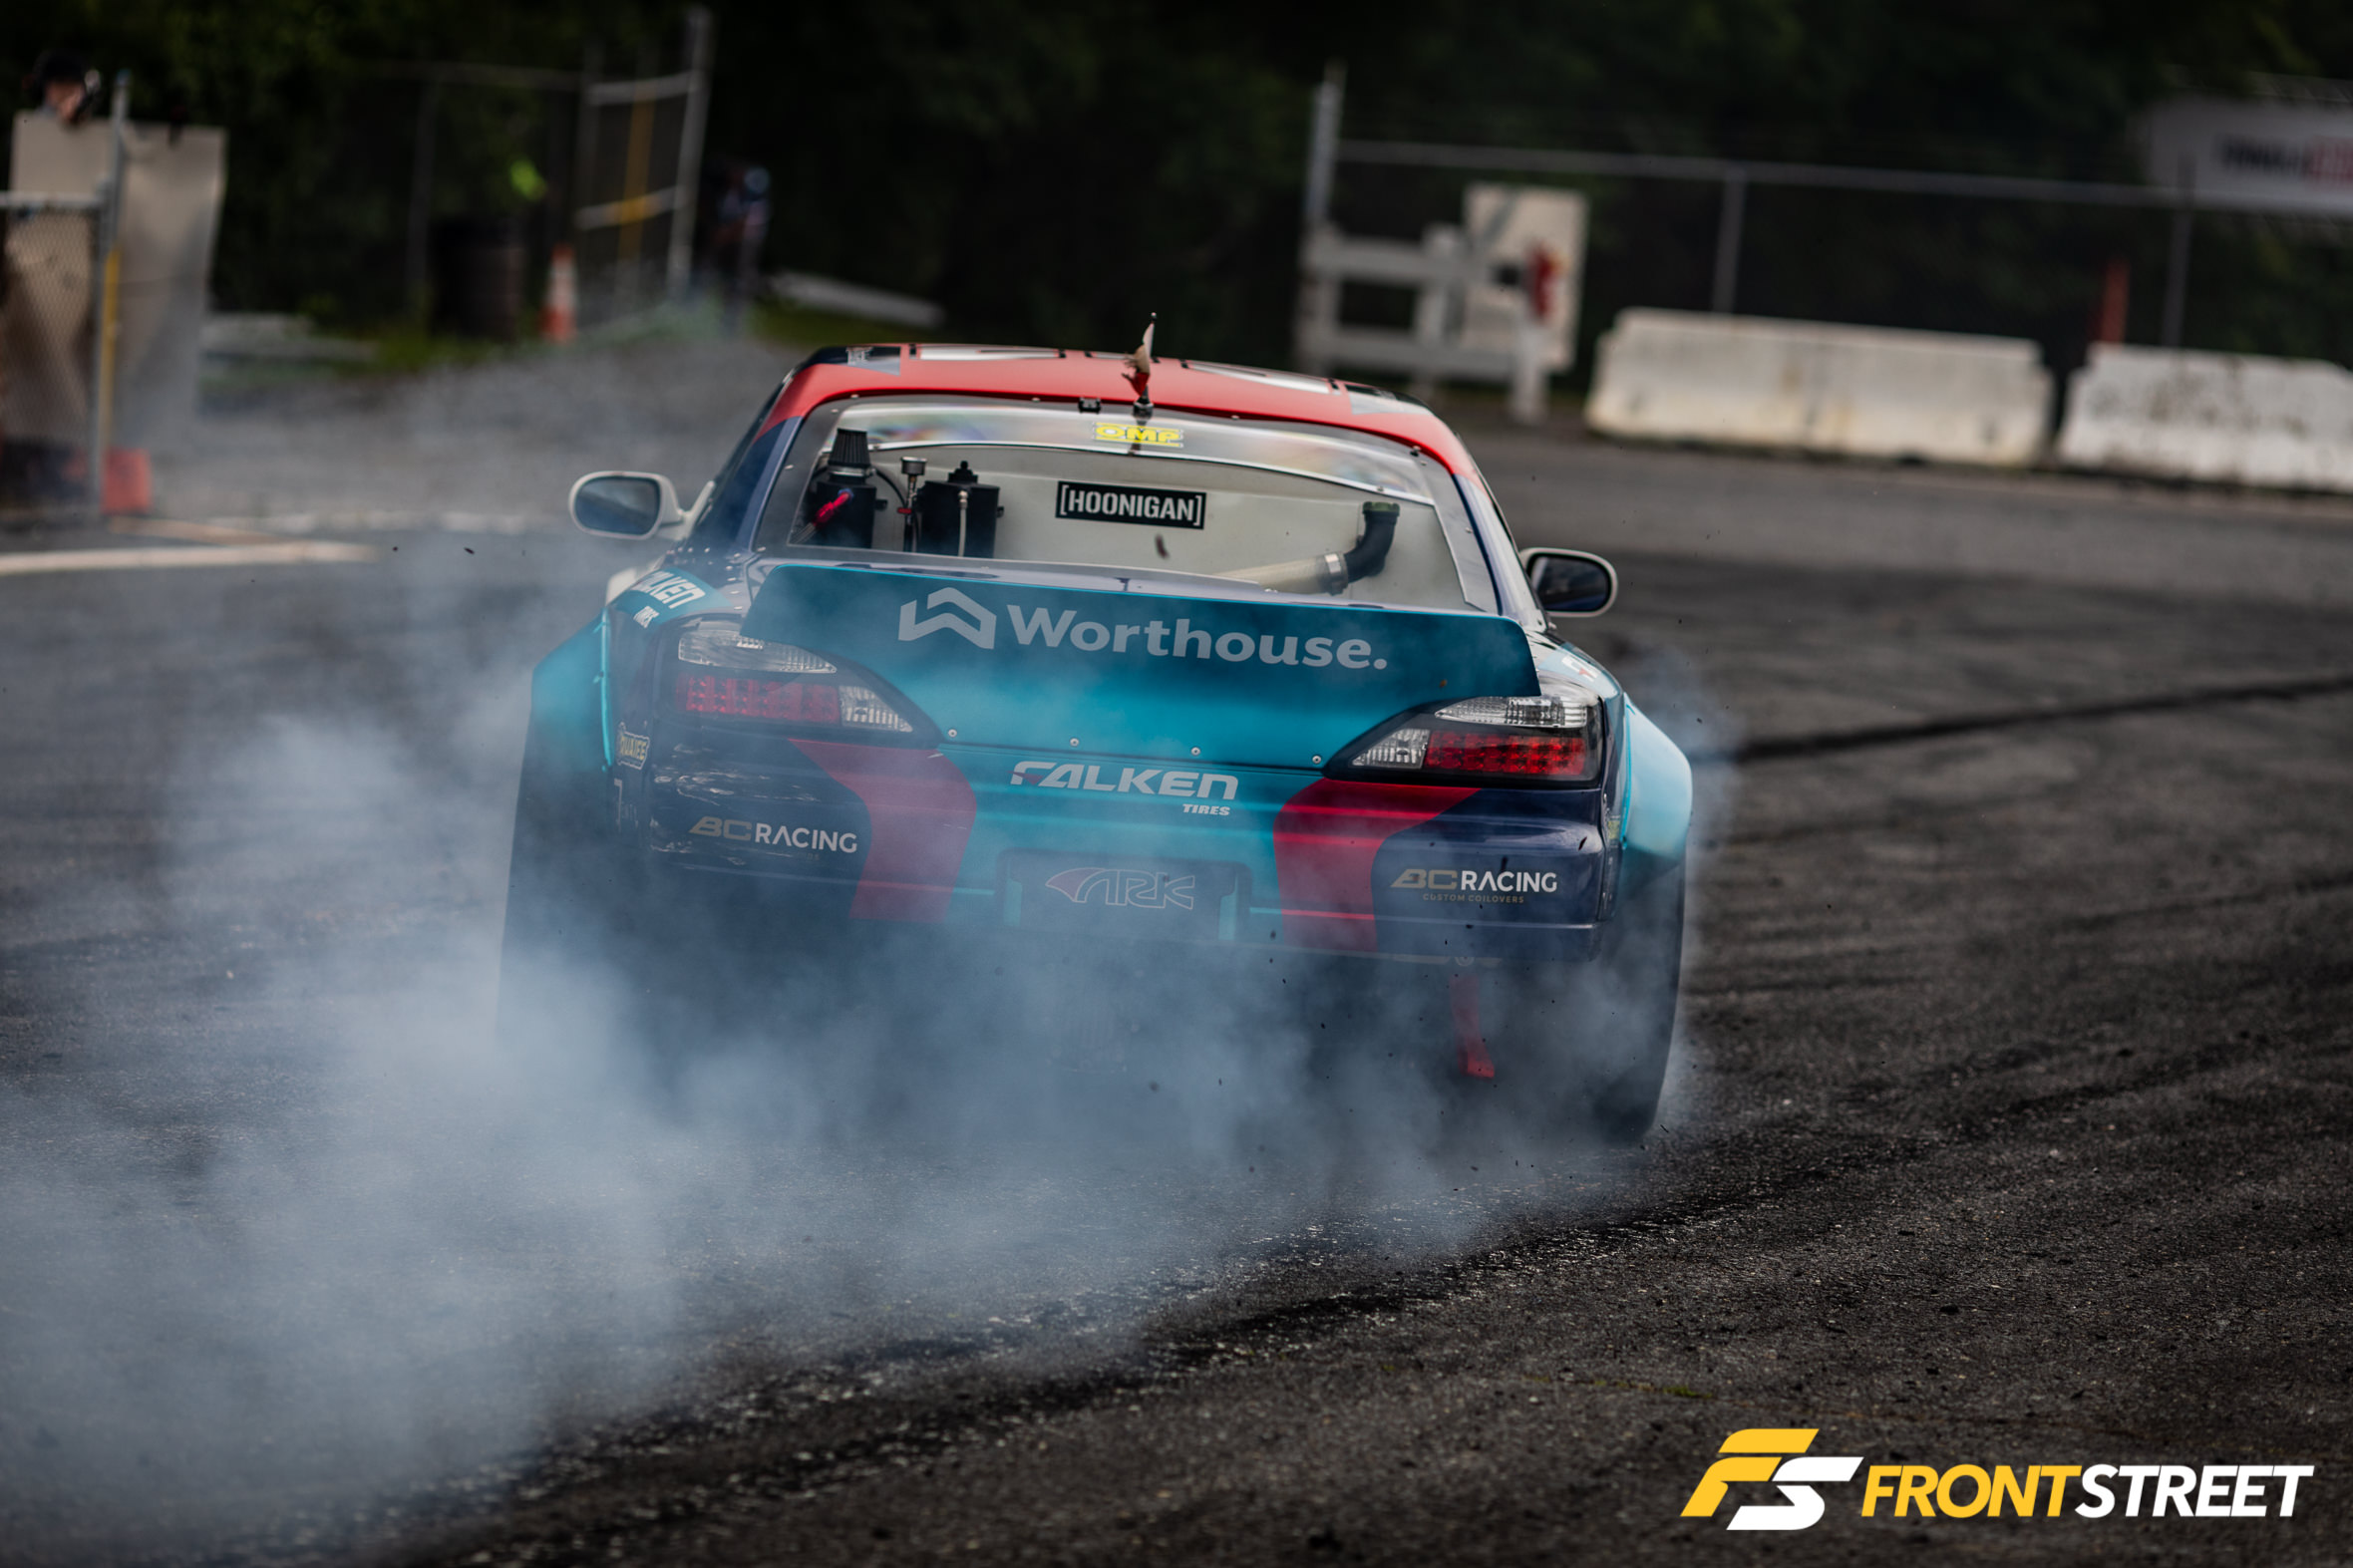 Formula Drift First-Timer: I Learned That Car Control Is Everything